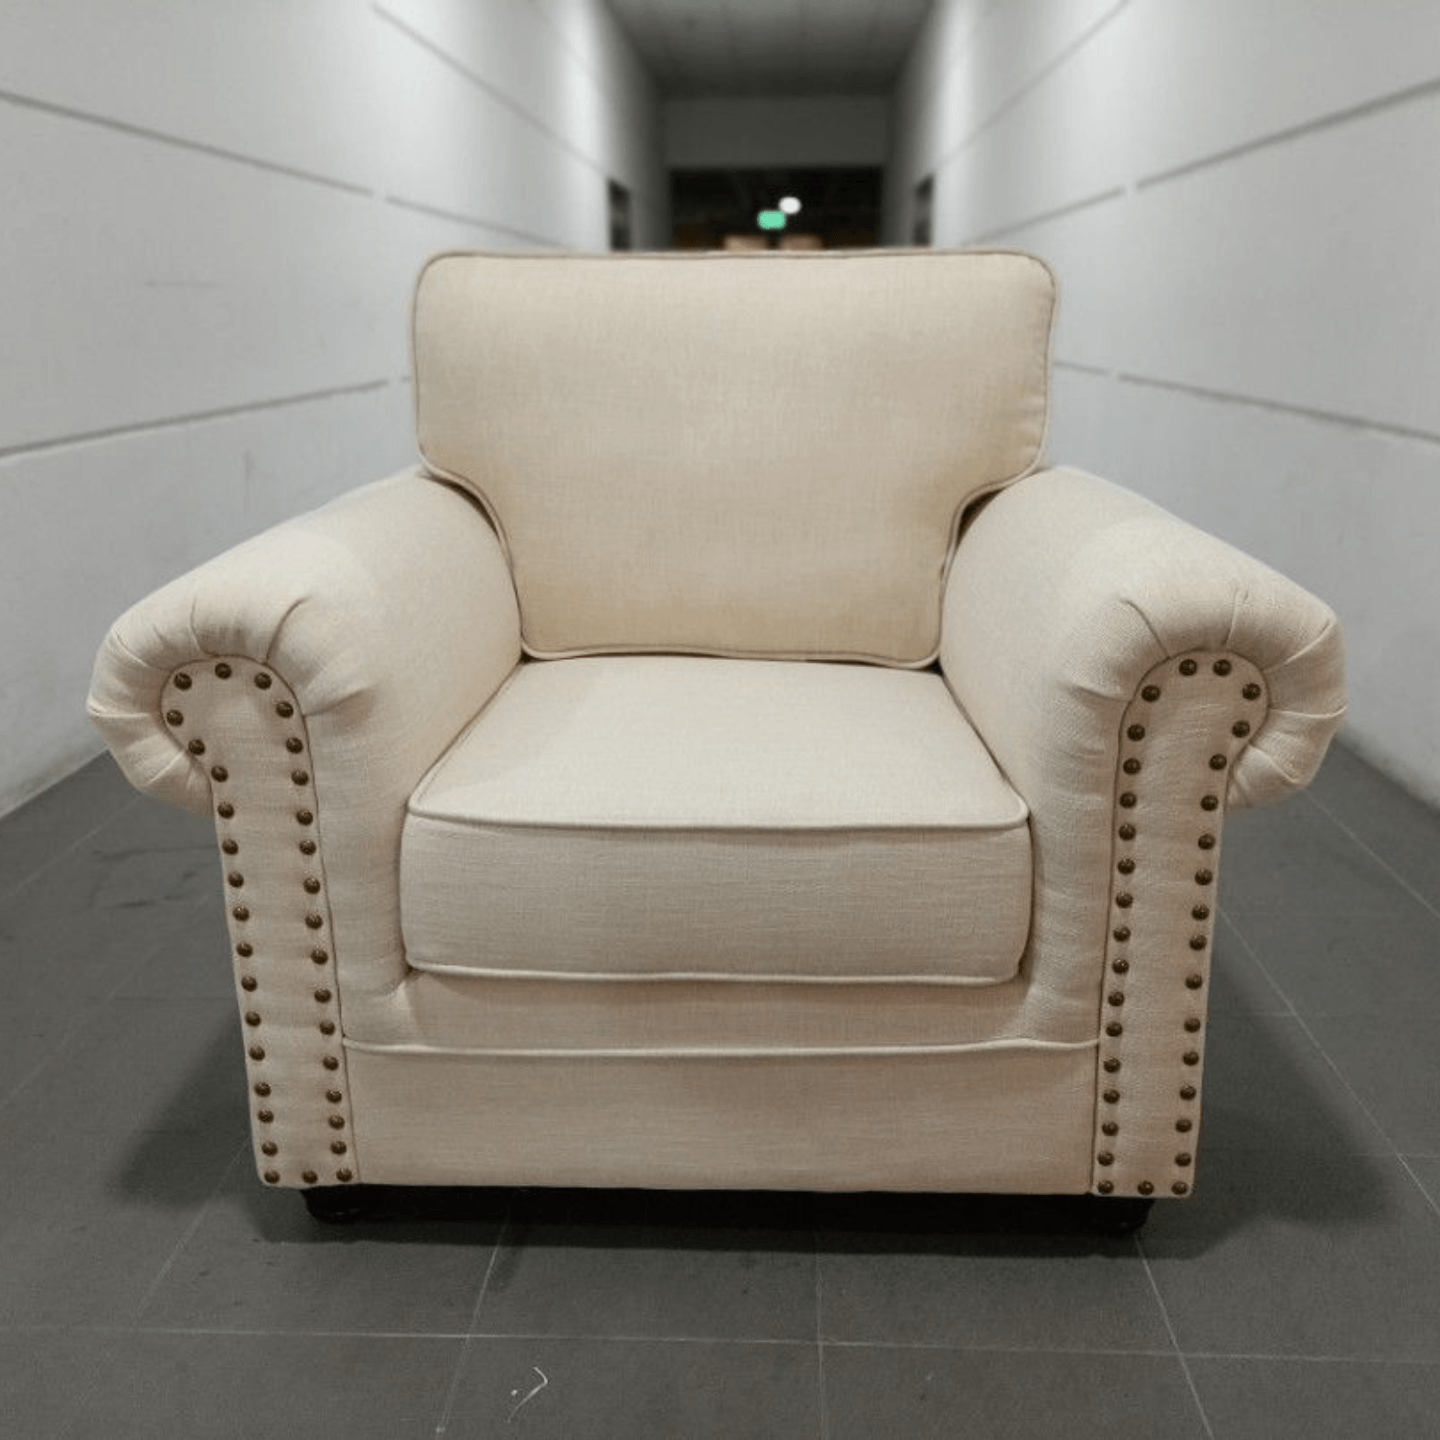 SALVADORE Z Chesterfield Armchair in BEIGE FABRIC